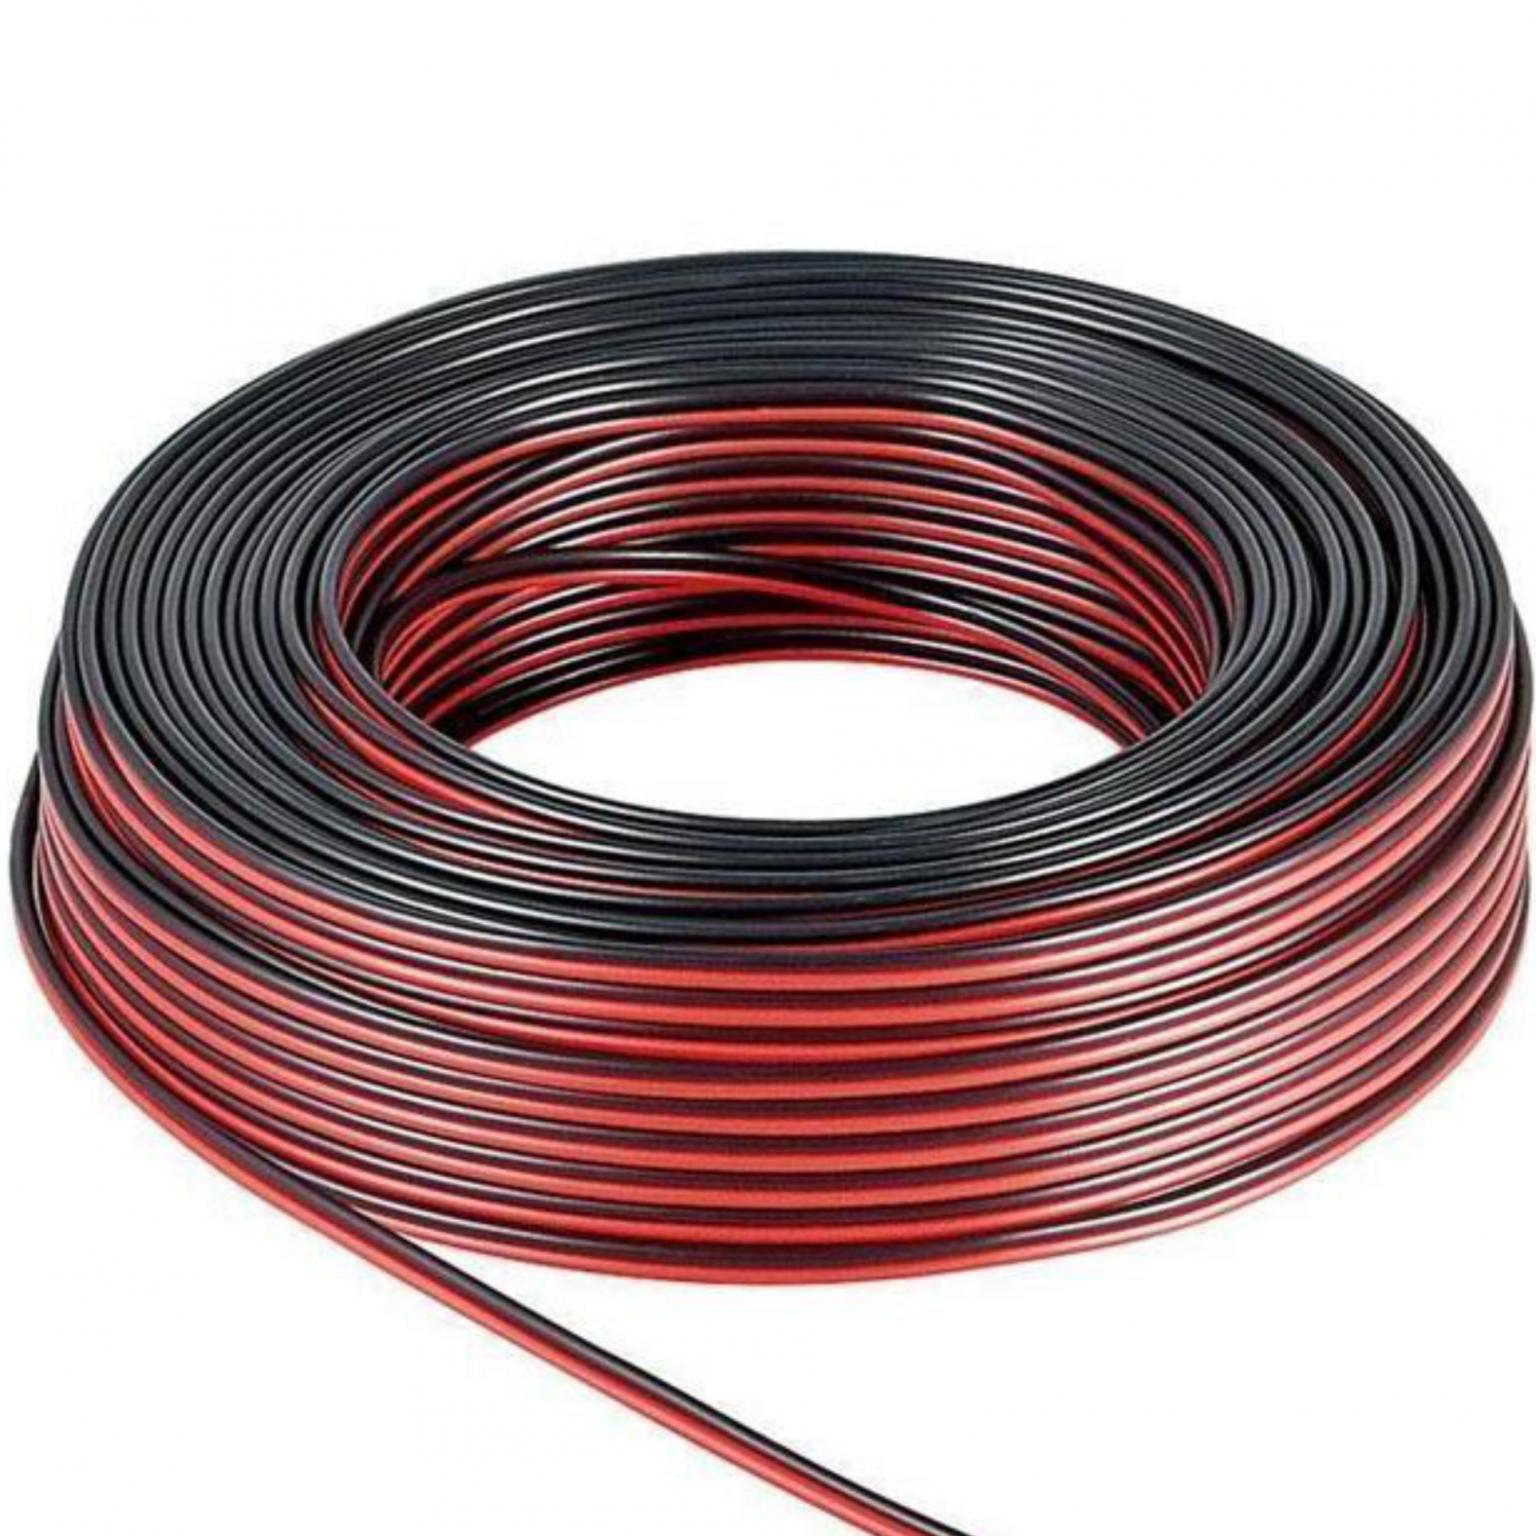 Image of Speaker cable red/black 10 m rolll, cable diameter 2 x 0,5 mm? - Gooba